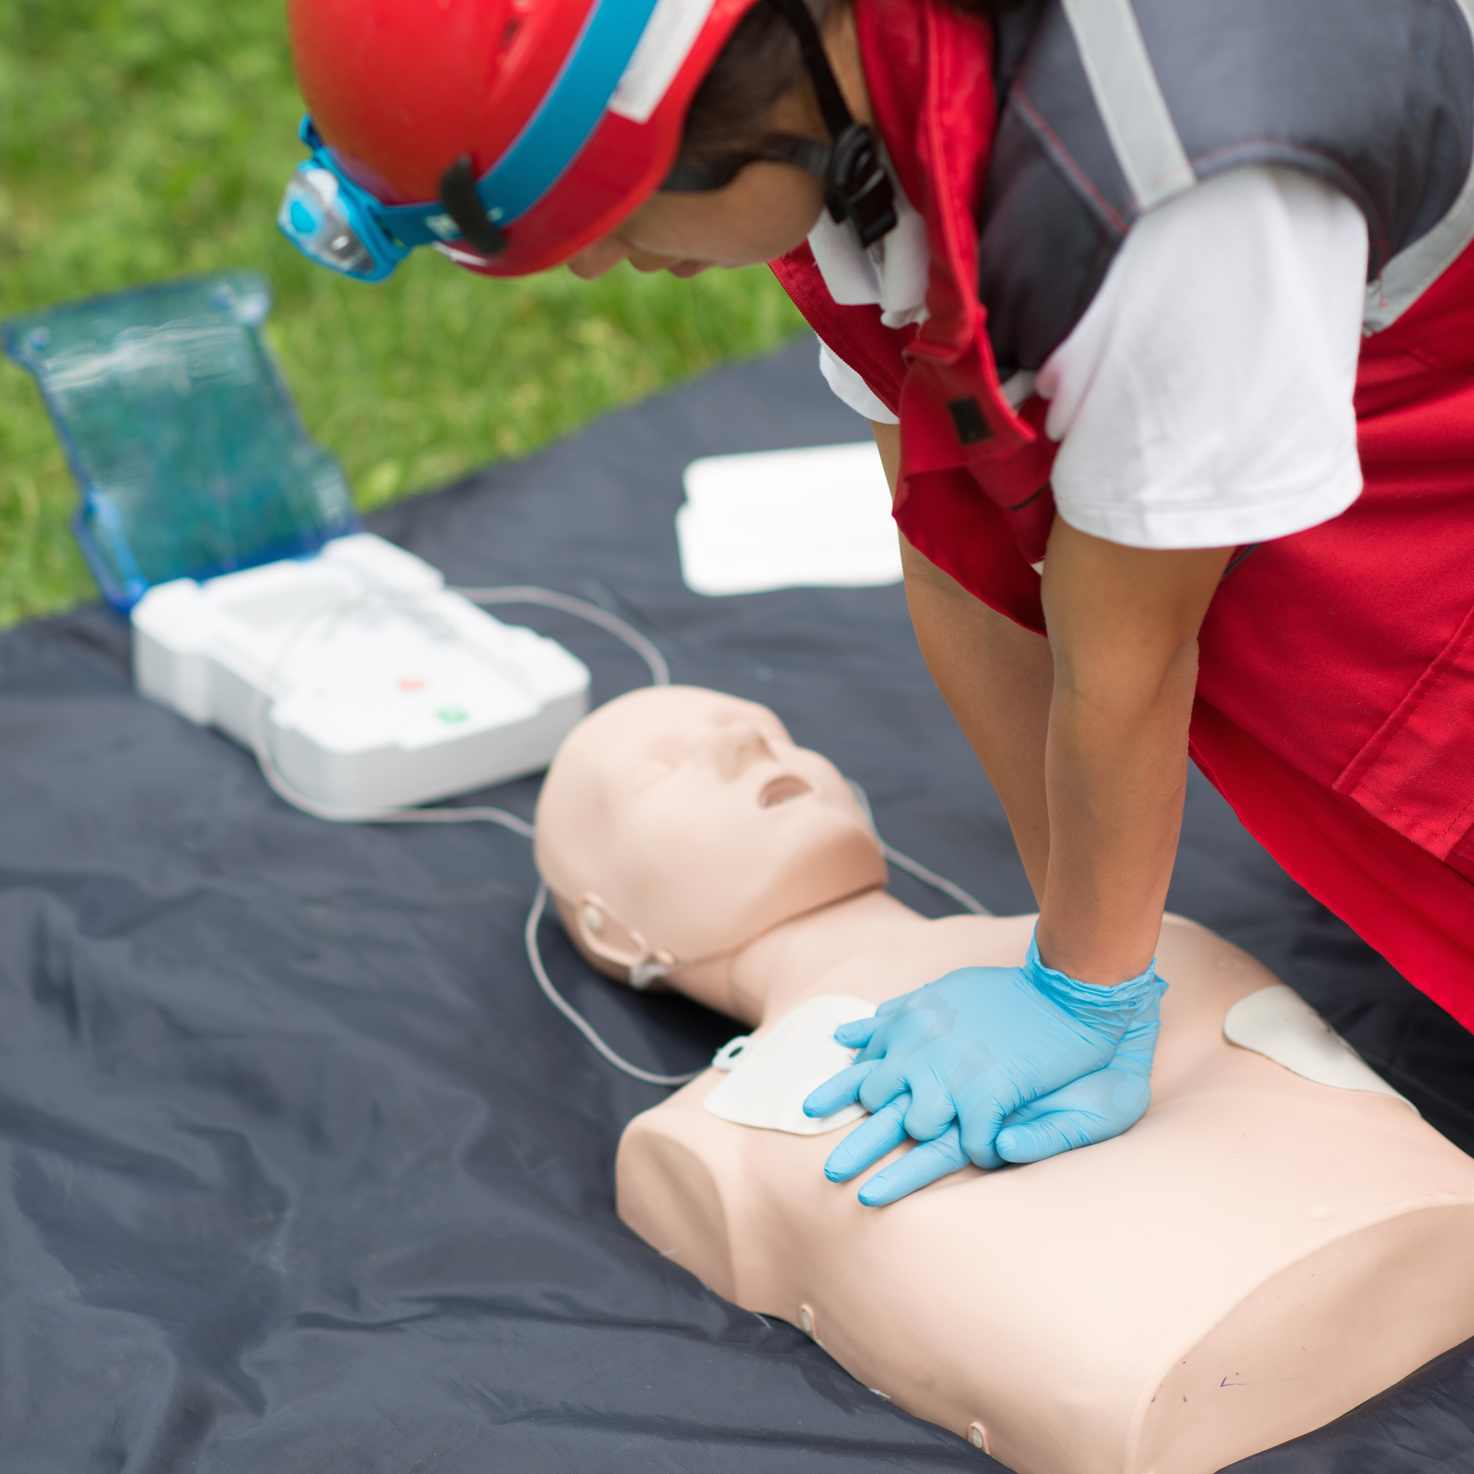 Healthcare Worker Practicing On Cpr Dummy At Park